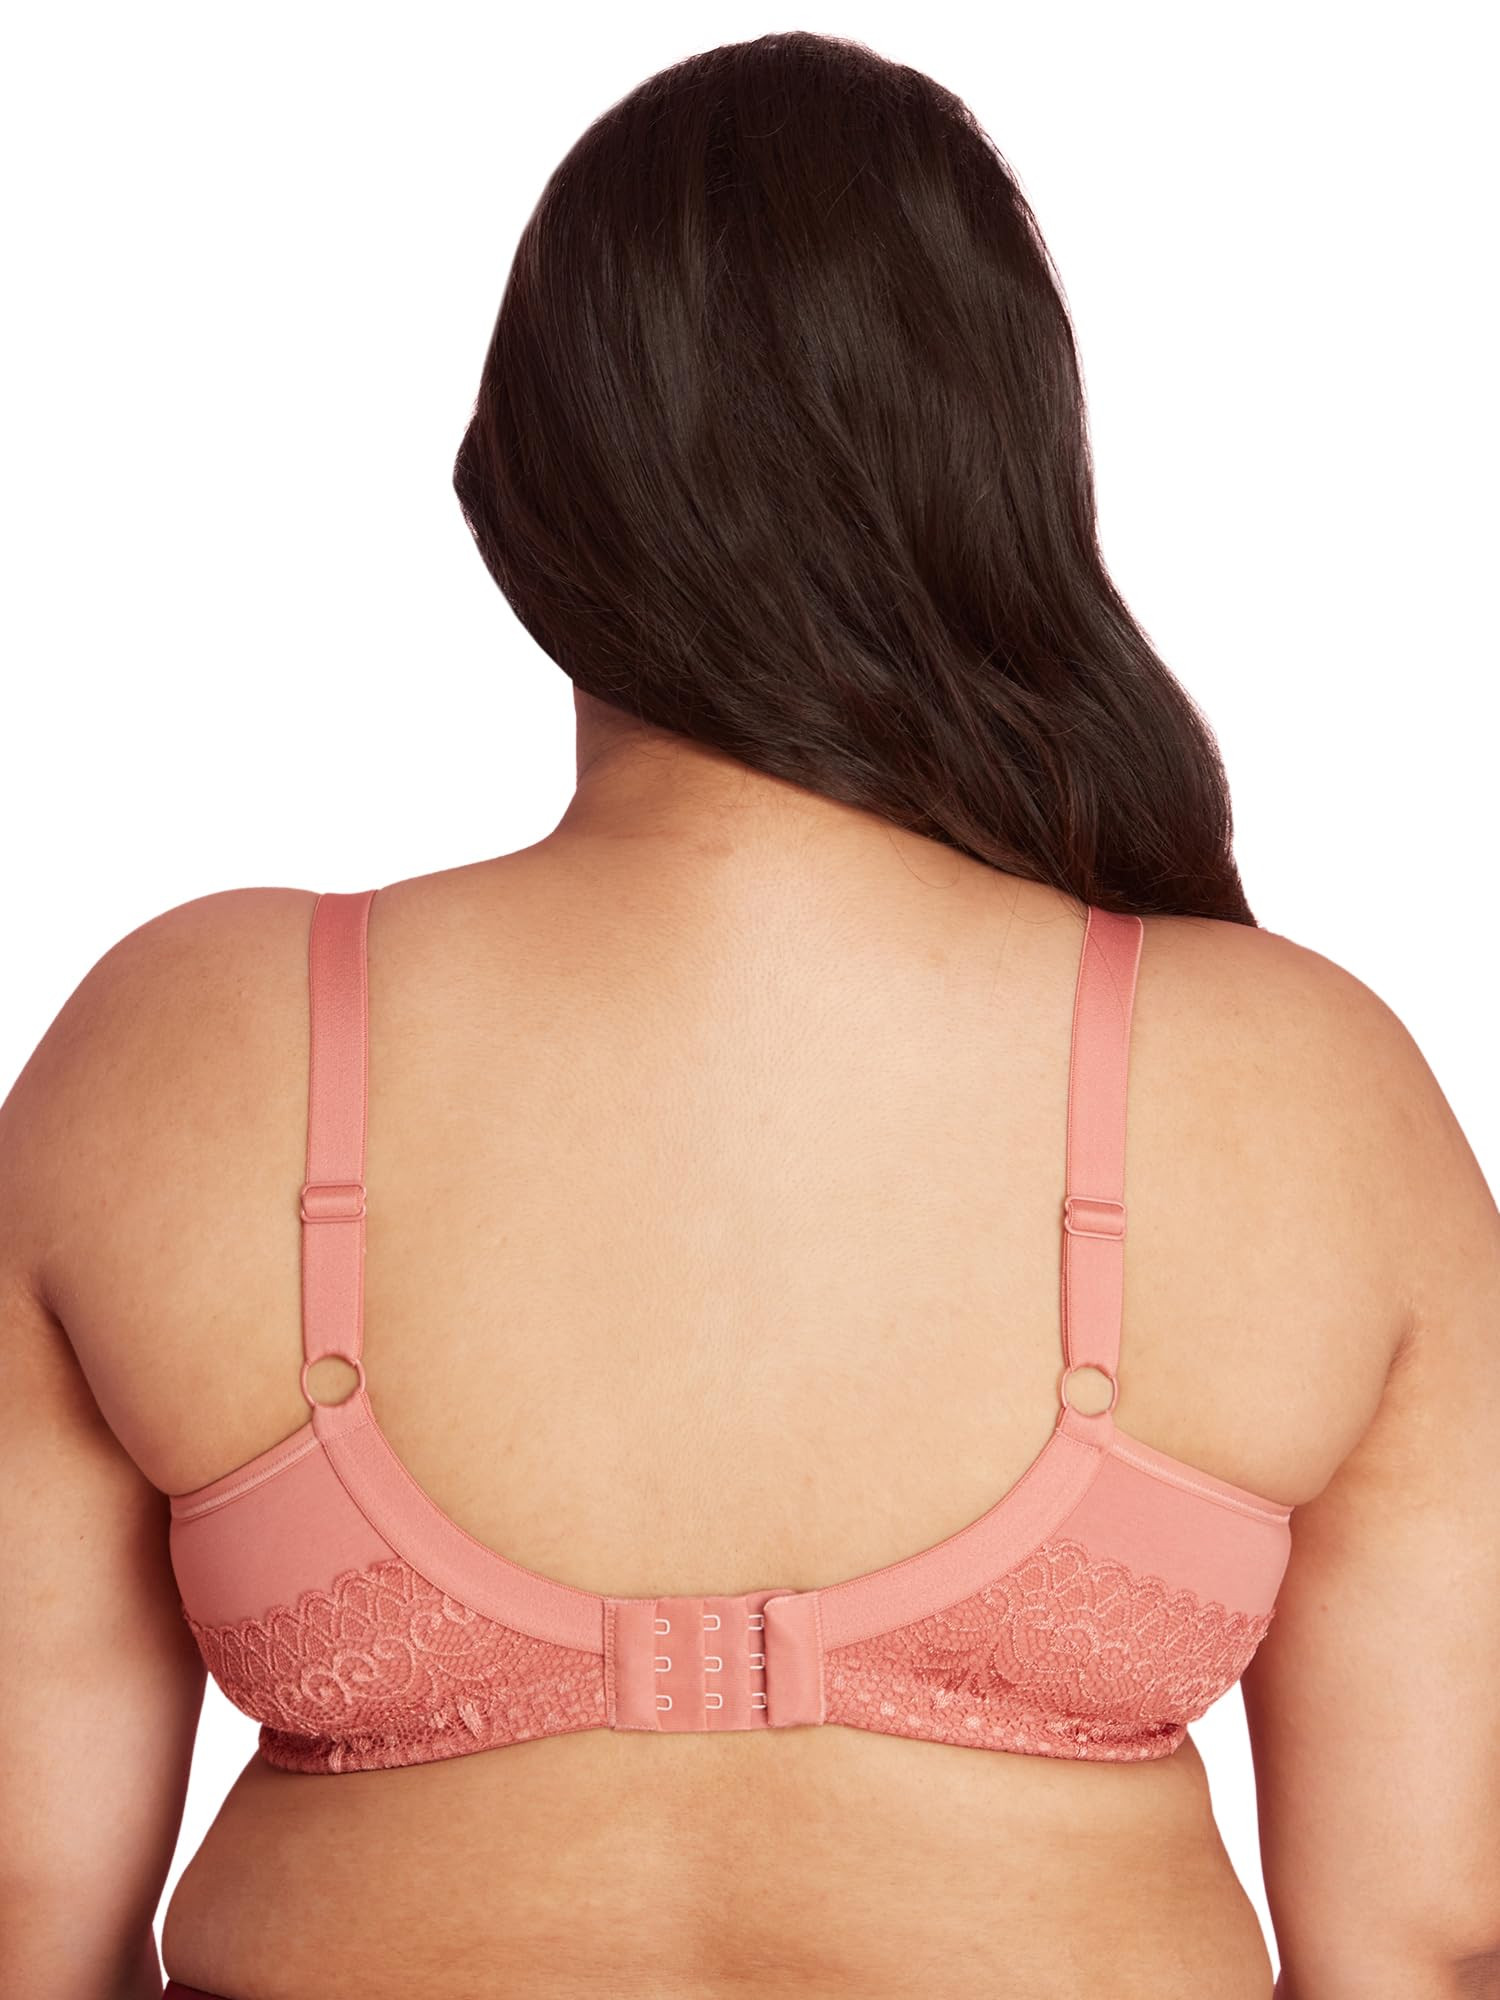 https://www.fastemi.com/uploads/fastemicom/products/nykd-by-nykaa-womens-full-support-m-frame-heavy-bust-everyday-cotton-bra--non-padded--wireless--full-coverage-minimizer-bra-nyb101-mauve-36d-1nsize-36d-240443580493268_l.jpg